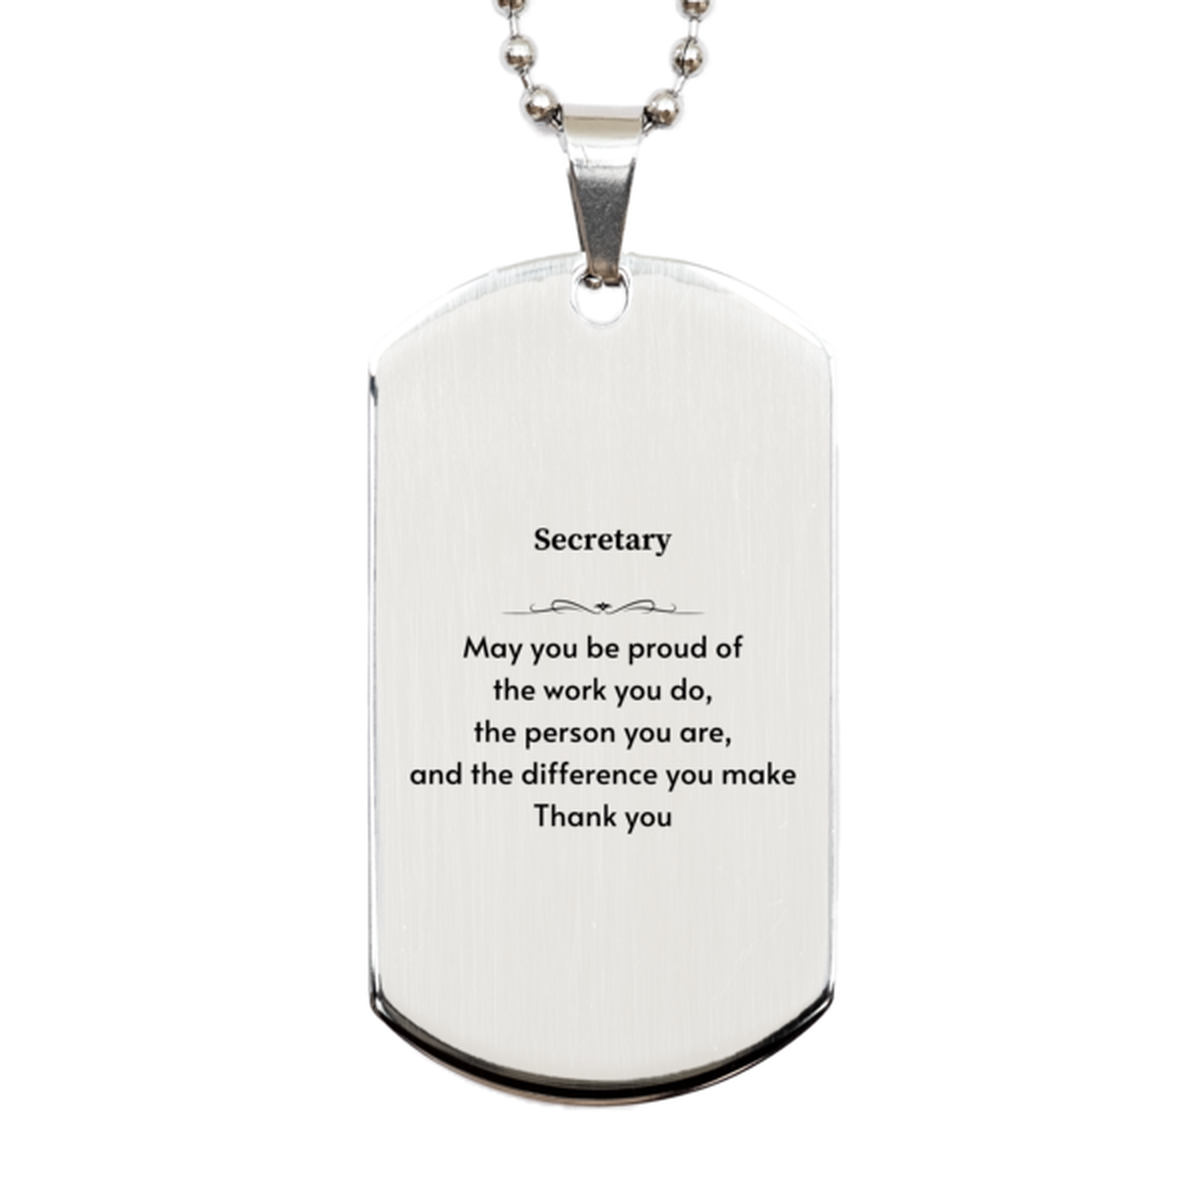 Heartwarming Silver Dog Tag Retirement Coworkers Gifts for Secretary, Secretary May You be proud of the work you do, the person you are Gifts for Boss Men Women Friends